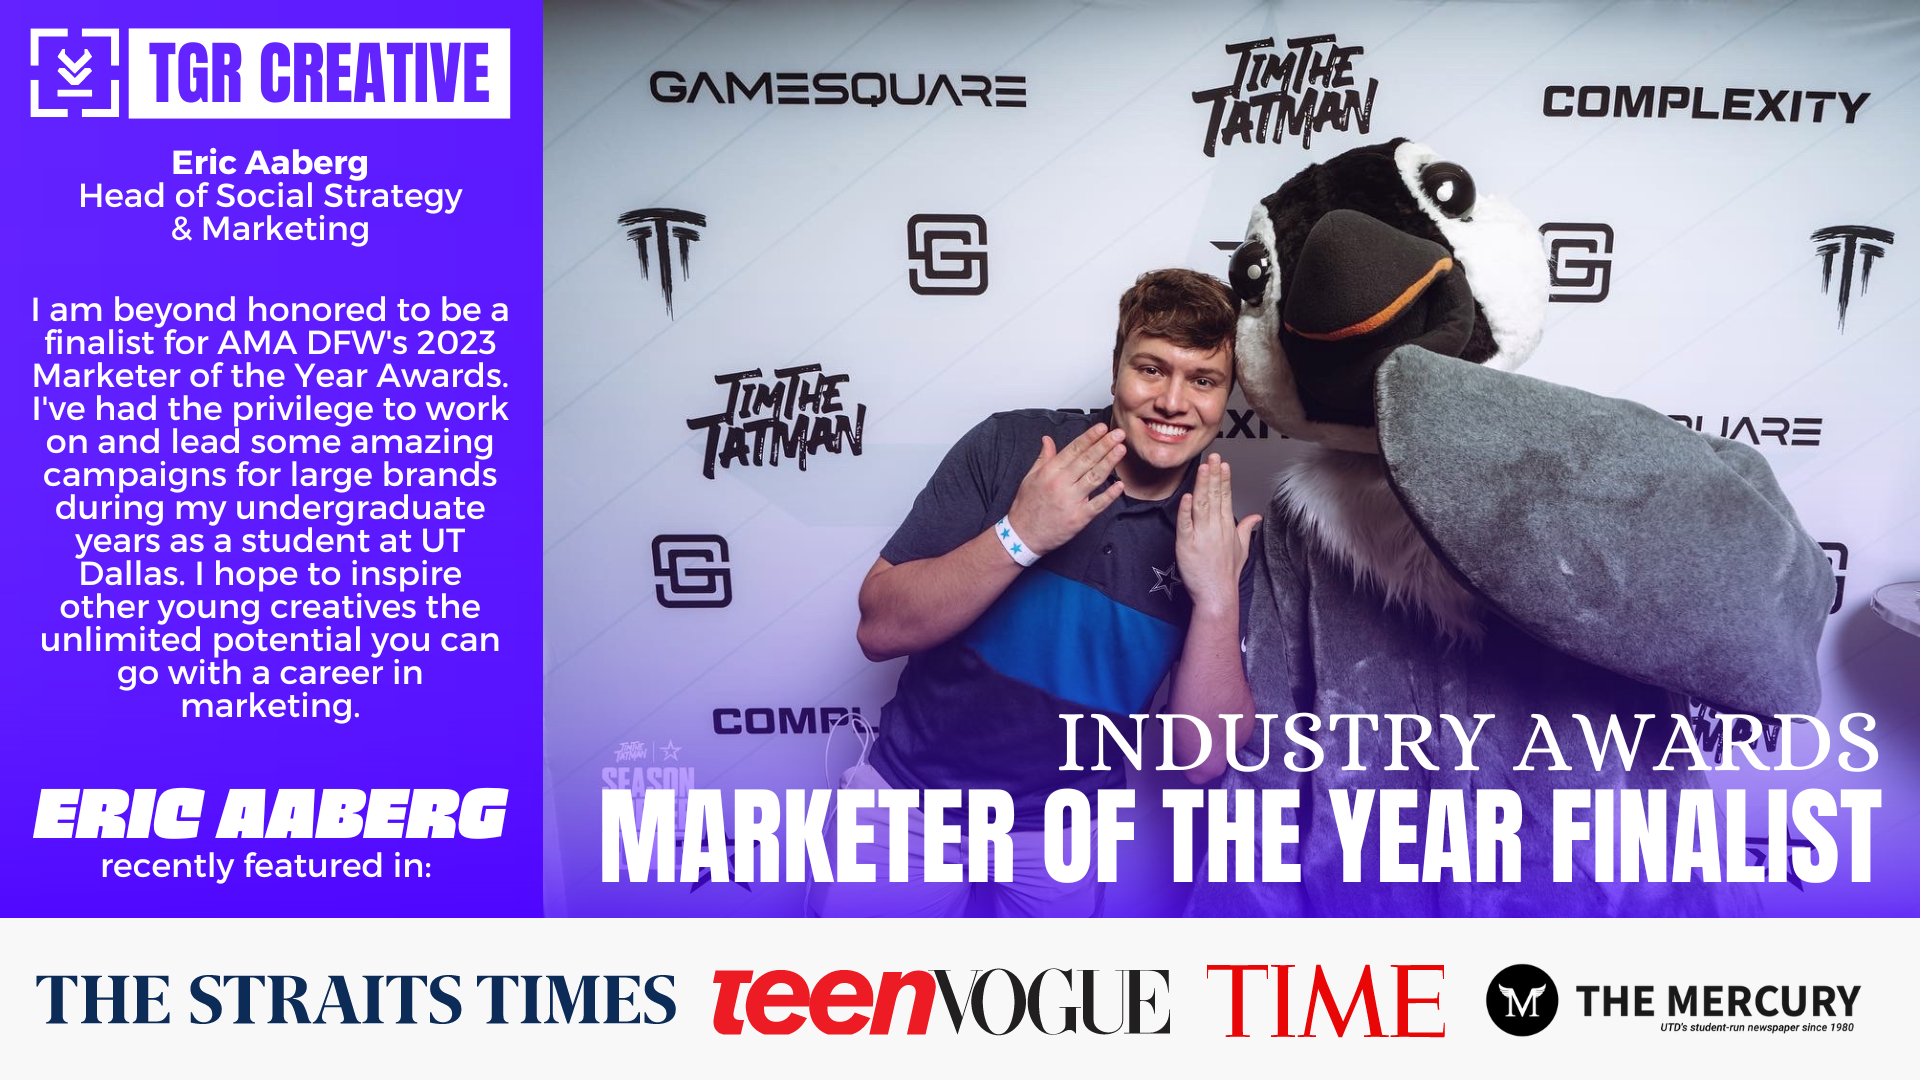 Eric Aaberg Named Finalist for 2023 Marketer of the Year Awards